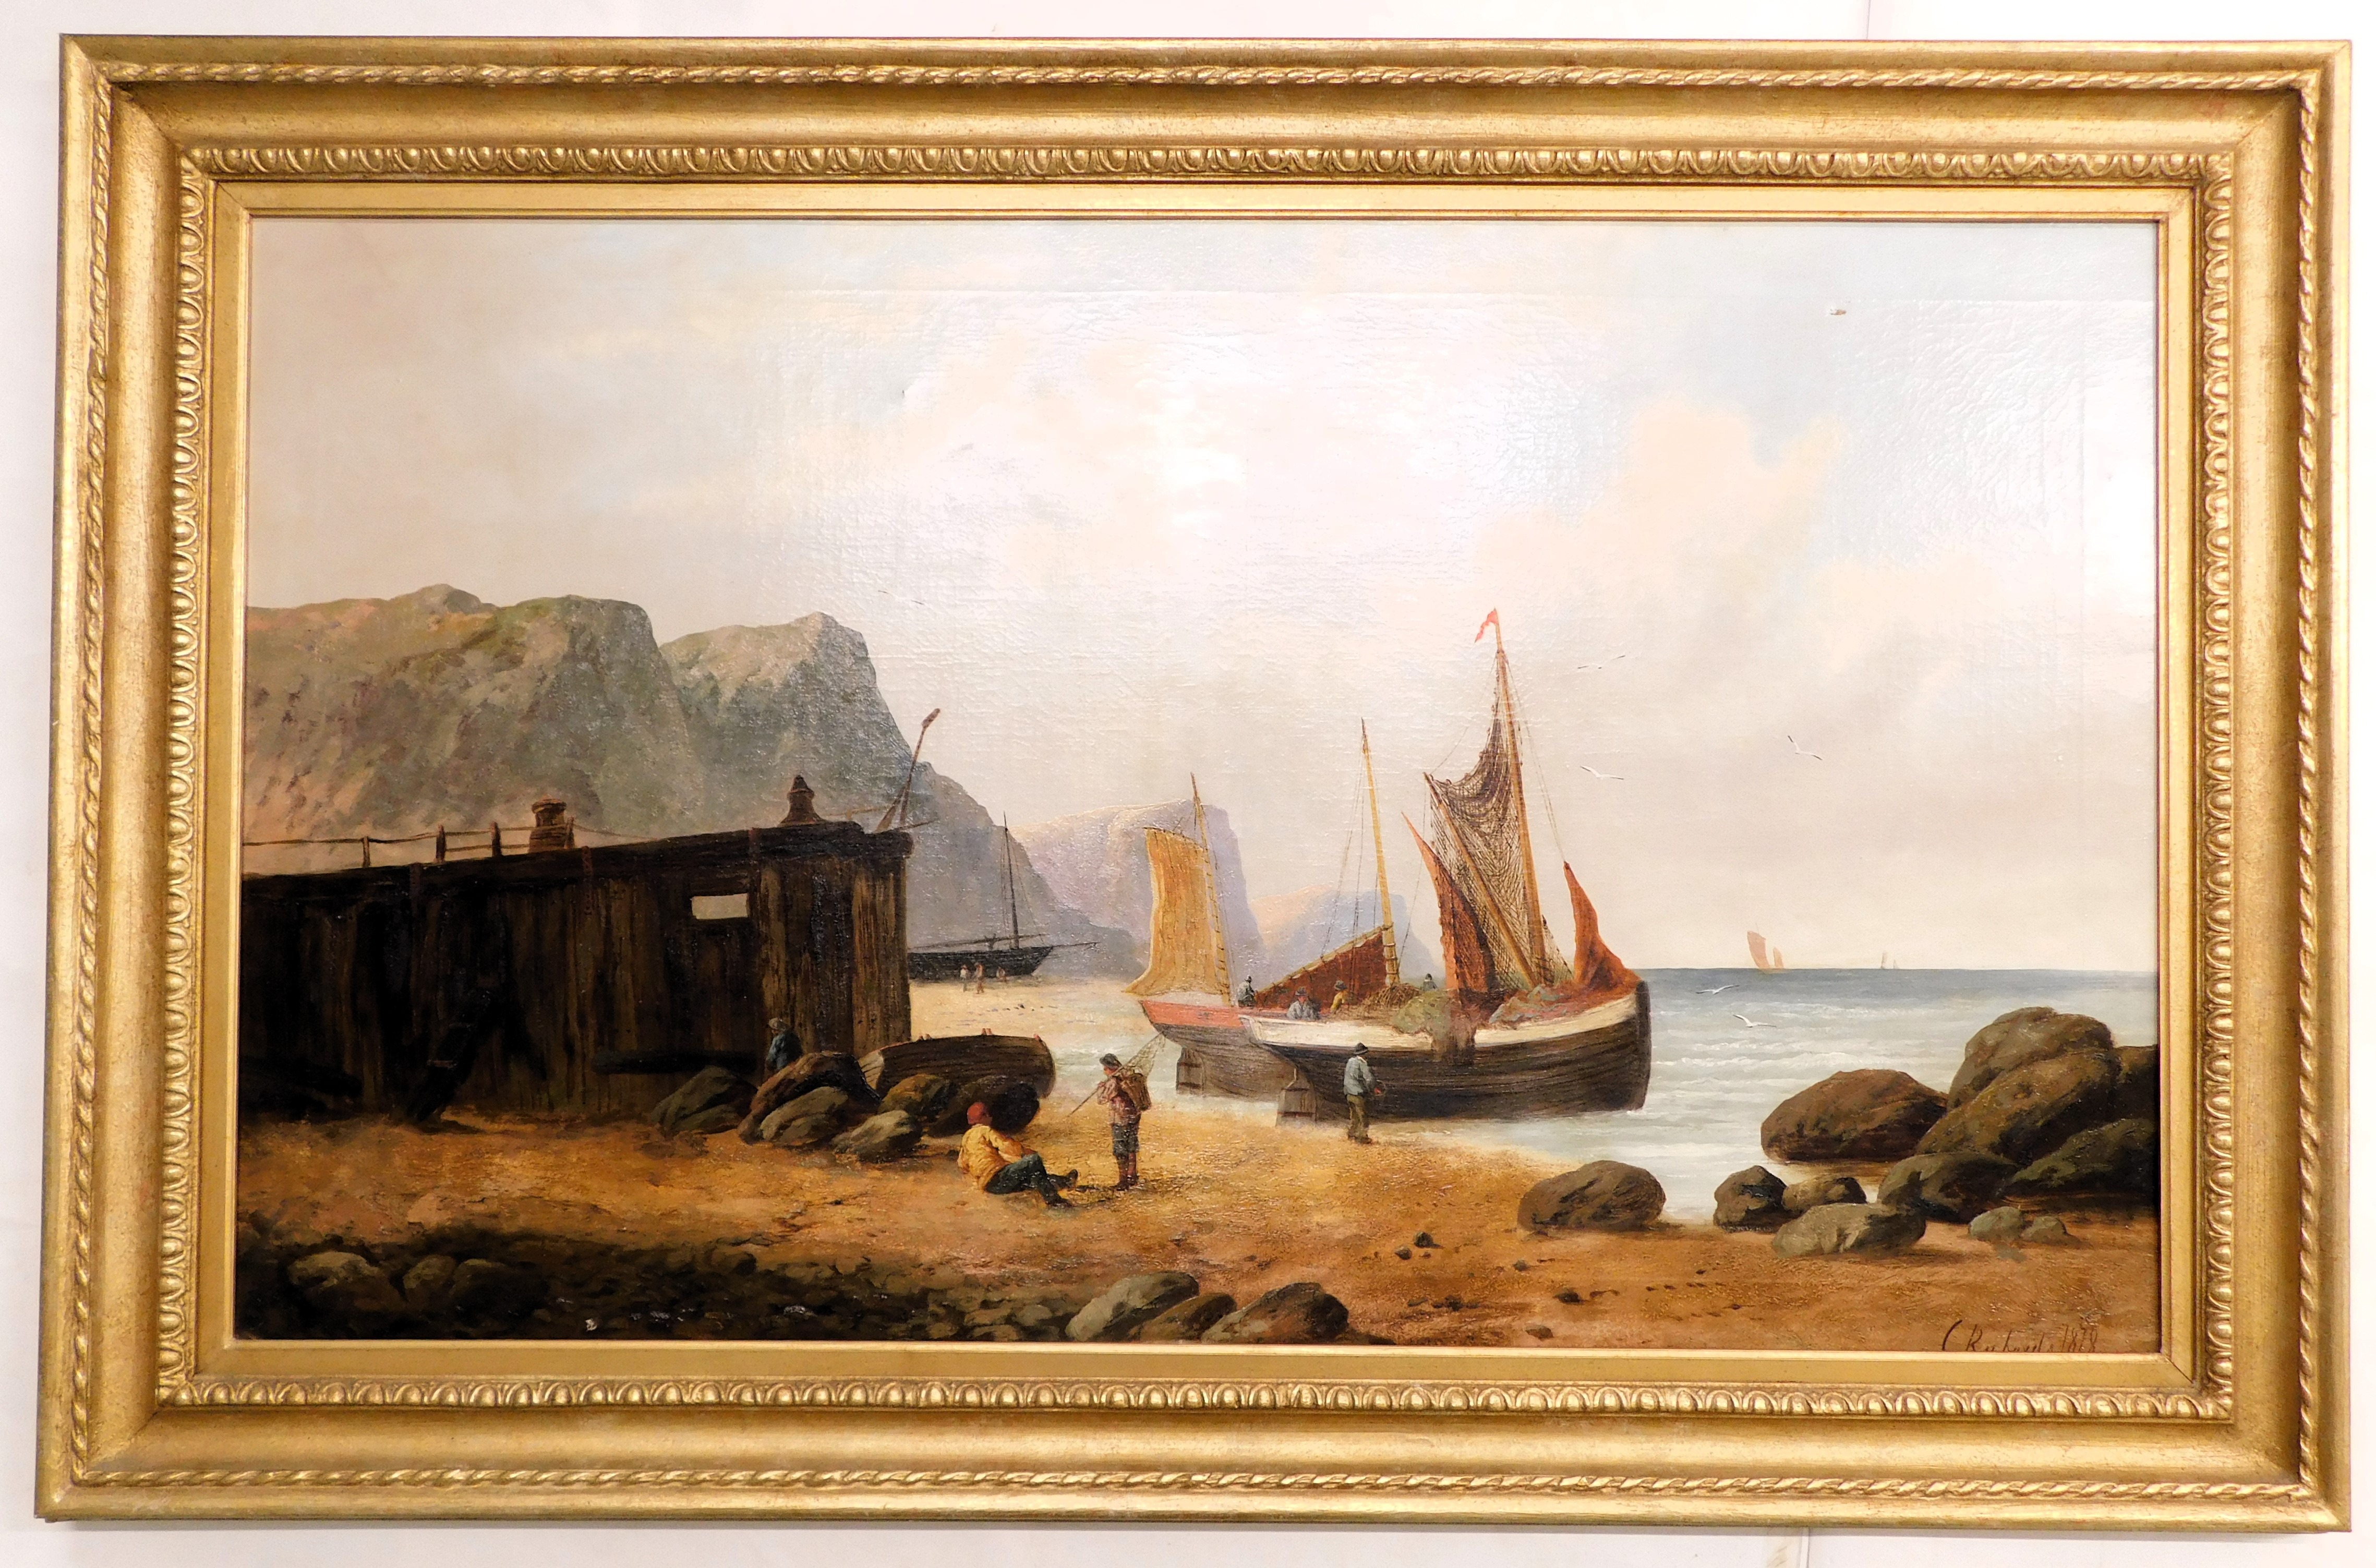 C. Richards. Coastal scene with fishing boats, oil on canvas, signed and dated 1878, 73cm x 123cm. - Image 2 of 5